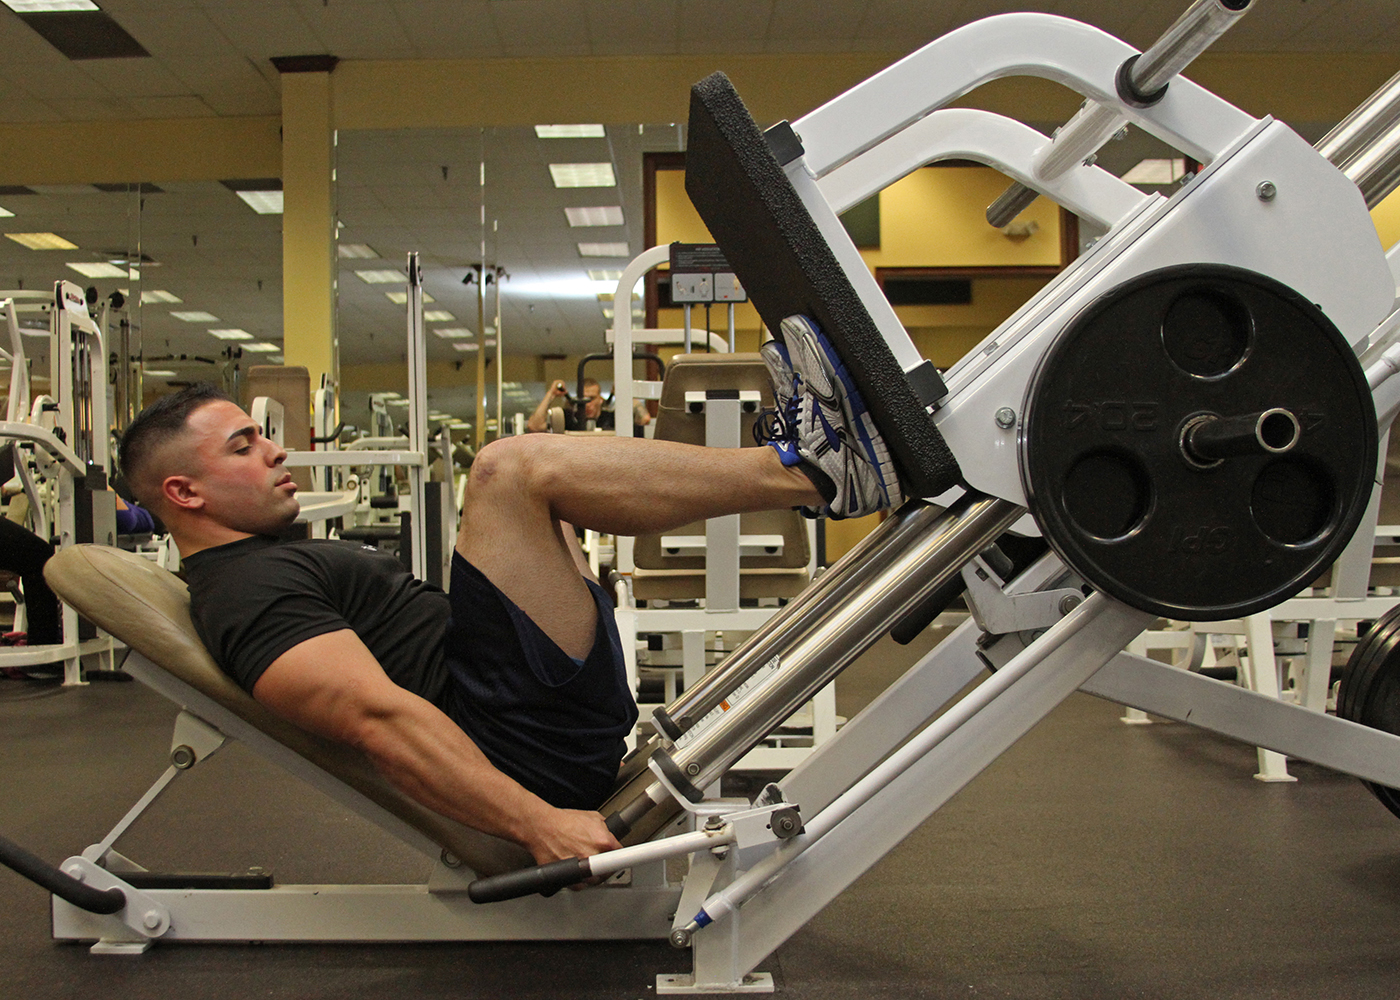 Sgt. Landon Rios, a canvassing recruiter with Recruiting Substation Augusta, Recruiting Station Columbia, performs a leg press exercise at Gold’s Gym on Dec. 17 in Augusta, Ga. Rios required emergency knee surgery following a motorcycle accident at this location on June 20. (Marine Corps Photo by Sgt. Aaron Rooks) 